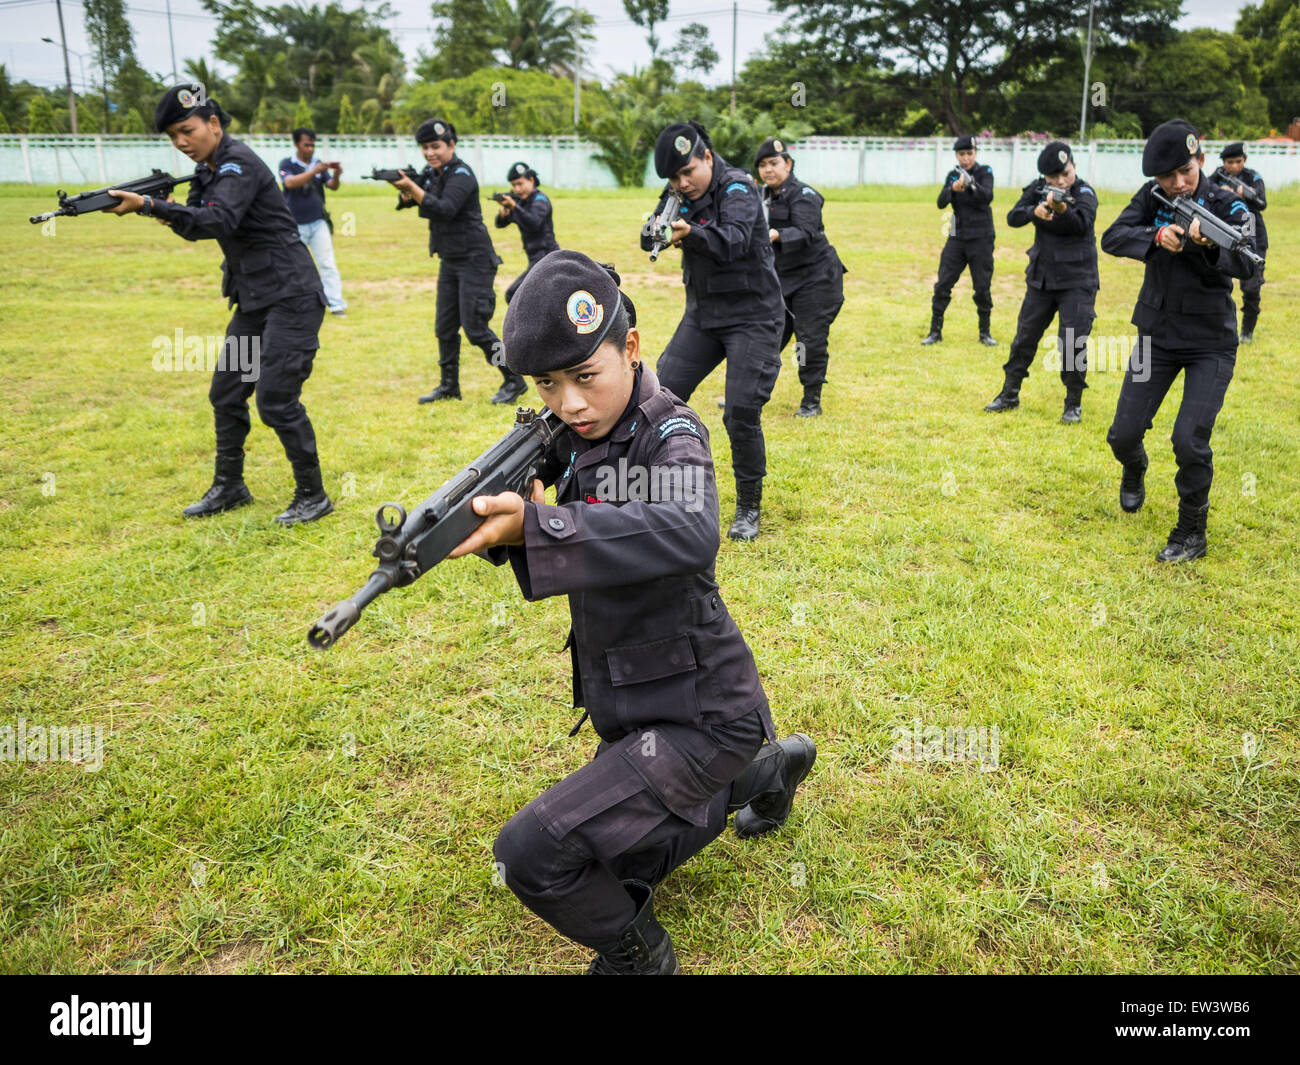 Rangae, Narathiwat, Thailand. 17th June, 2015. Thai women Rangers drill with HK33 Assault Rifles. There are 5 platoons of women Rangers serving in Thailand's restive Deep South. They generally perform security missions at large public events and do public outreach missions, like home wellness checks and delivering food and medicine into rural communities. © Jack Kurtz/ZUMA Wire/Alamy Live News Stock Photo